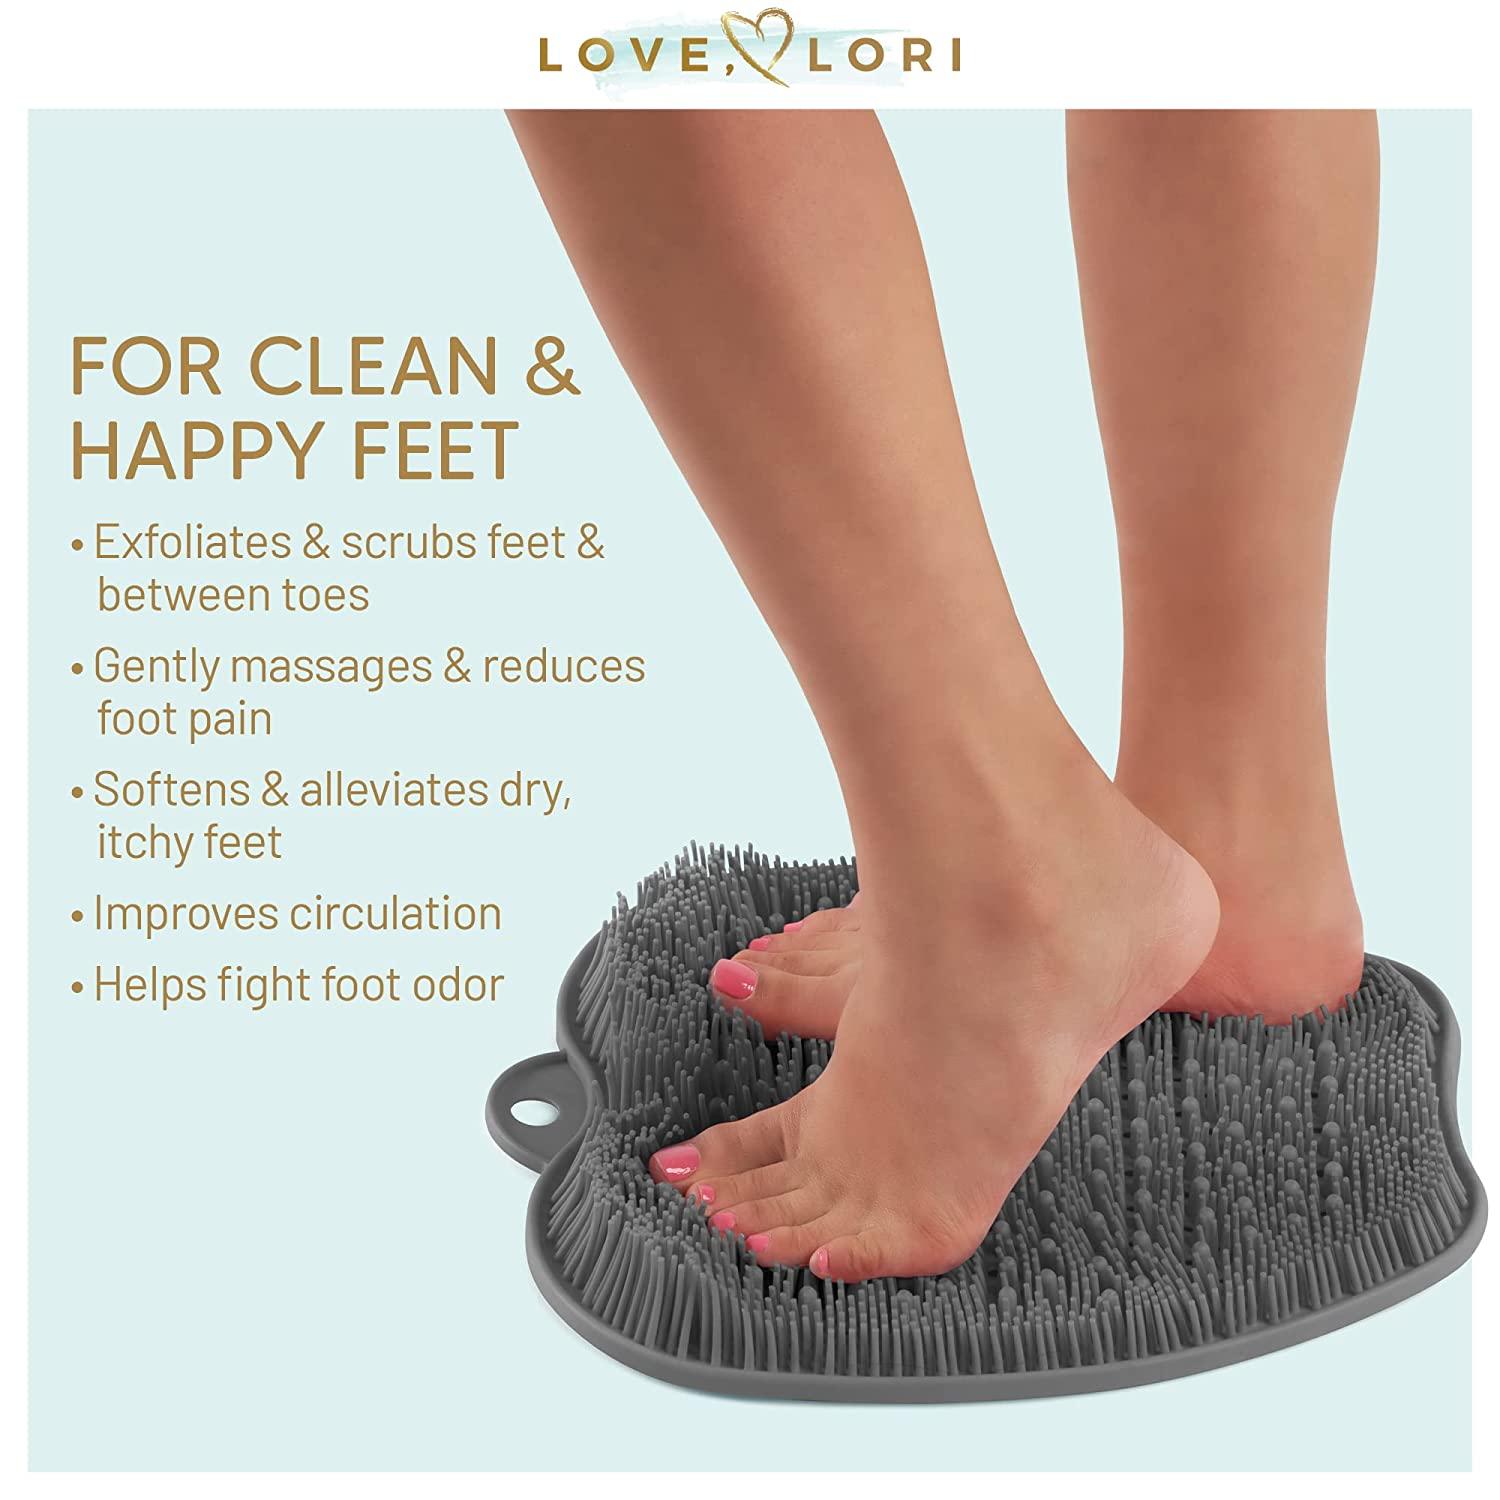 Scrub Away Calluses With Our Top 5 Shower Foot Scrubbers